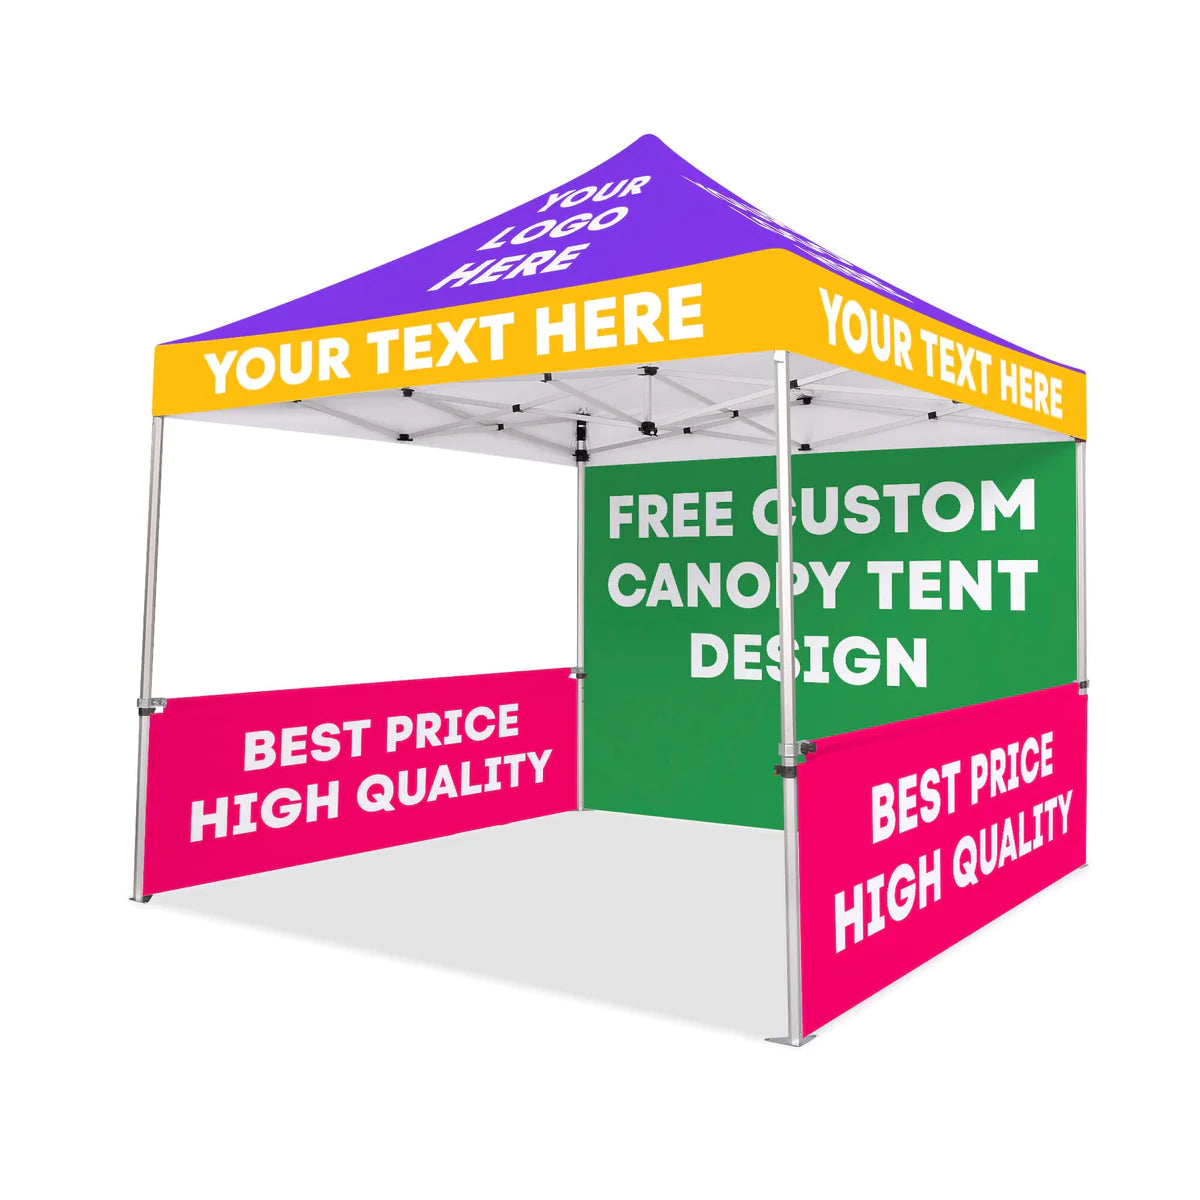 What Are Other Names for Canopy Tents?